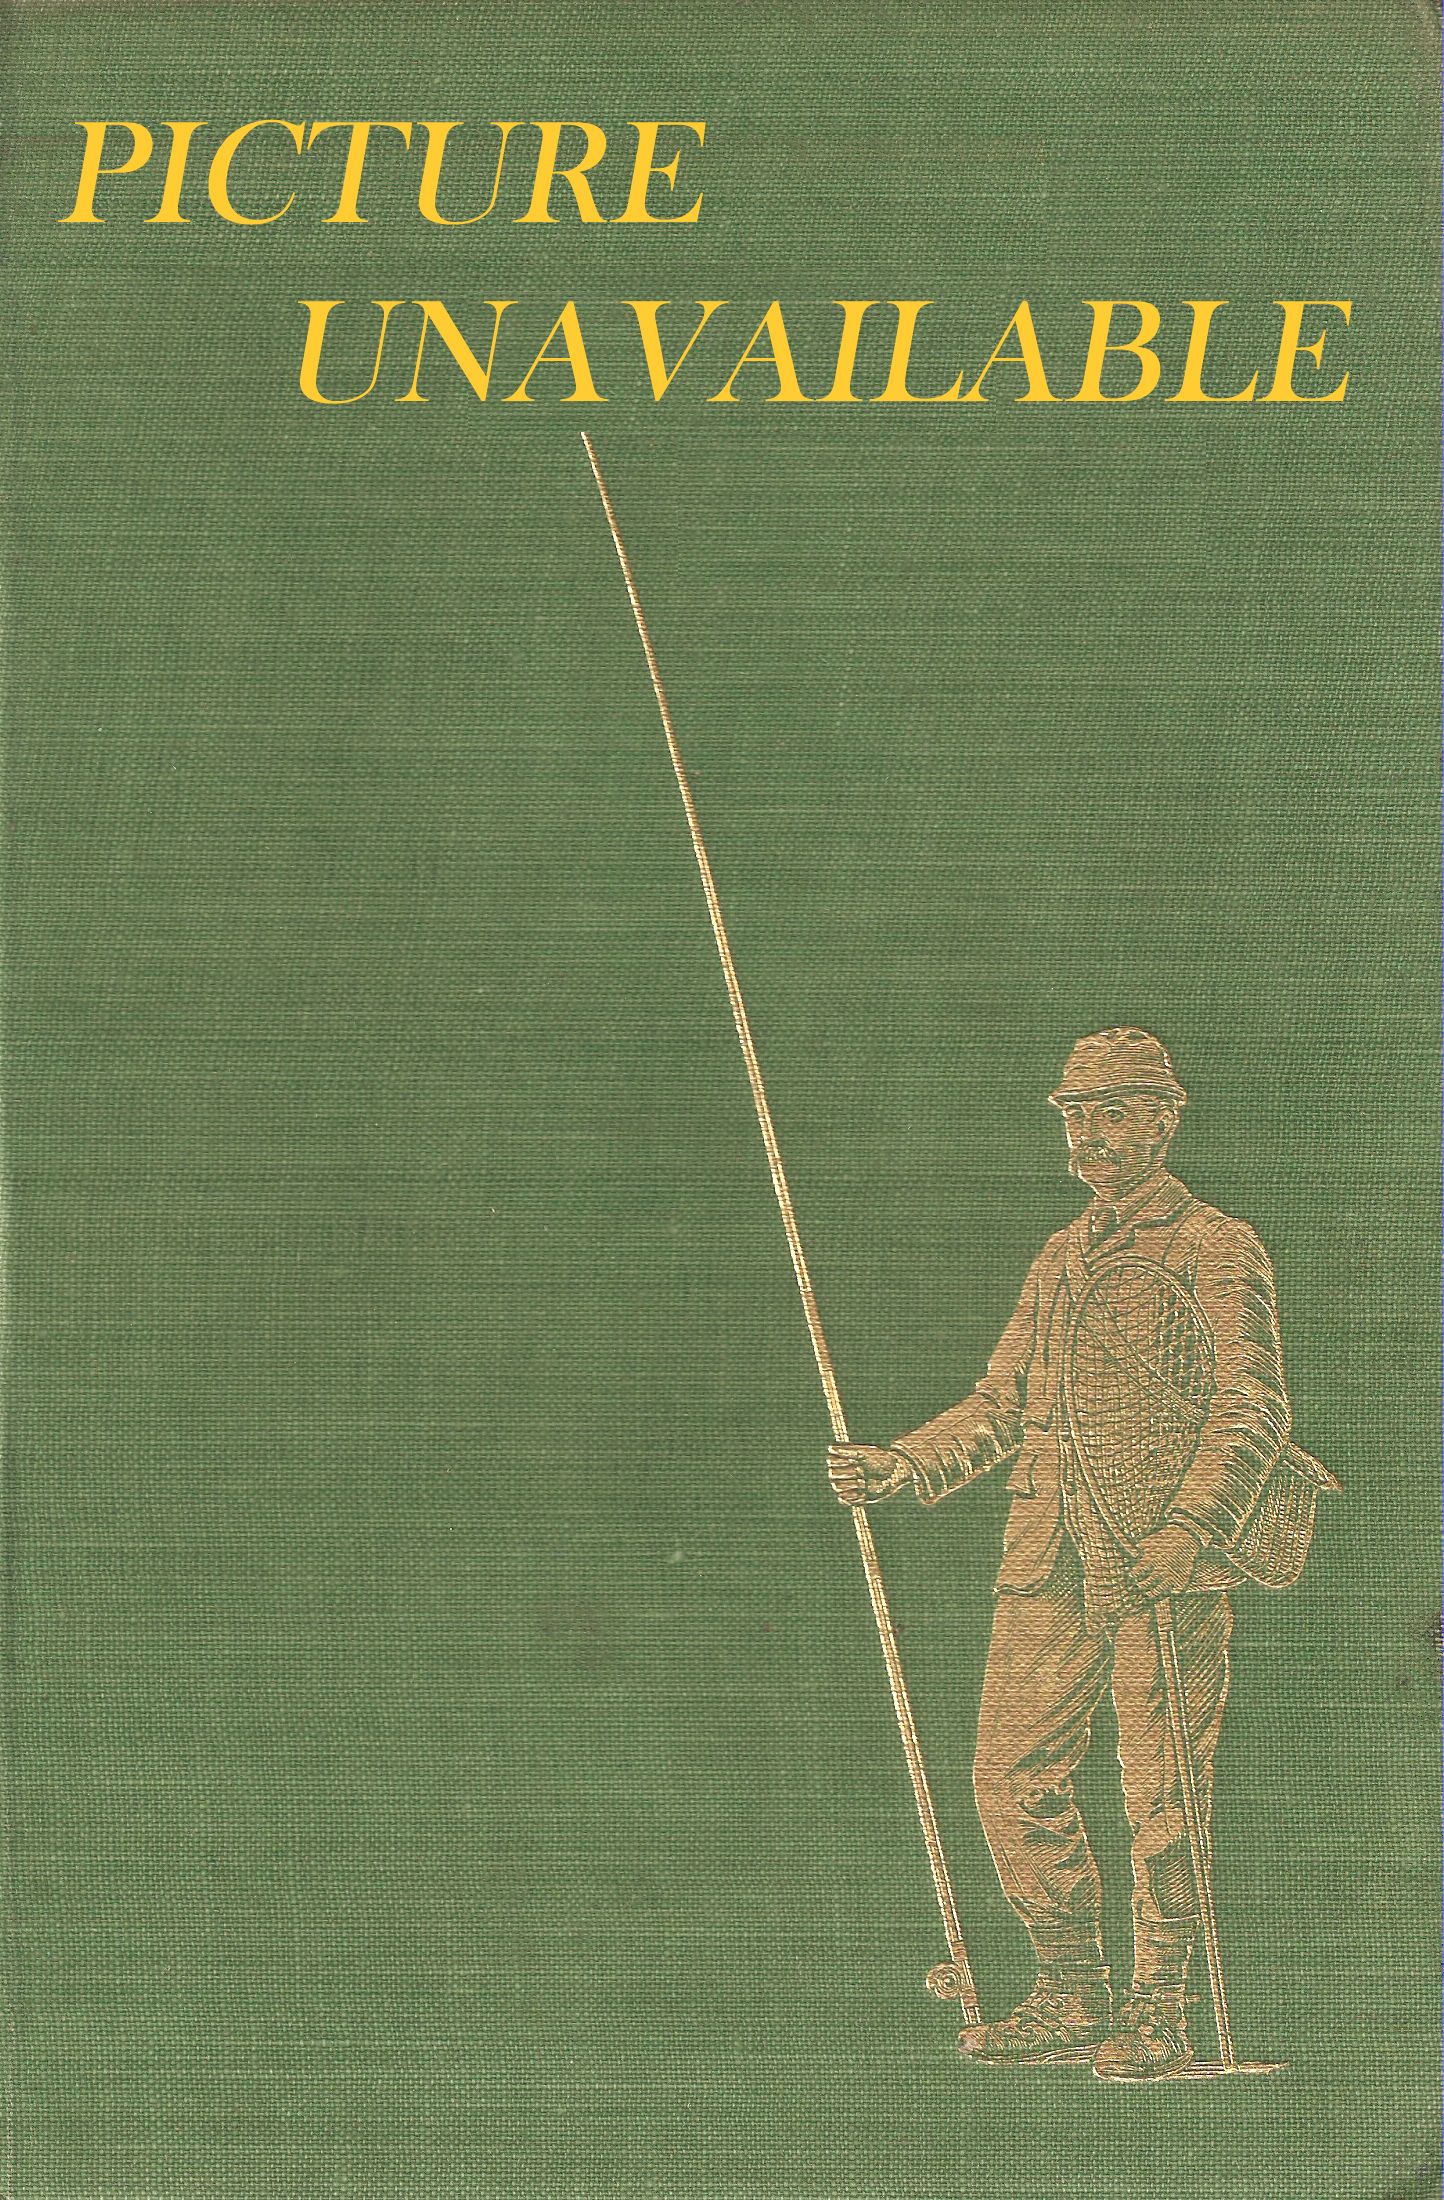 THE ANGLING TIMES BOOK OF THE WYE. By Leslie Baverstock.